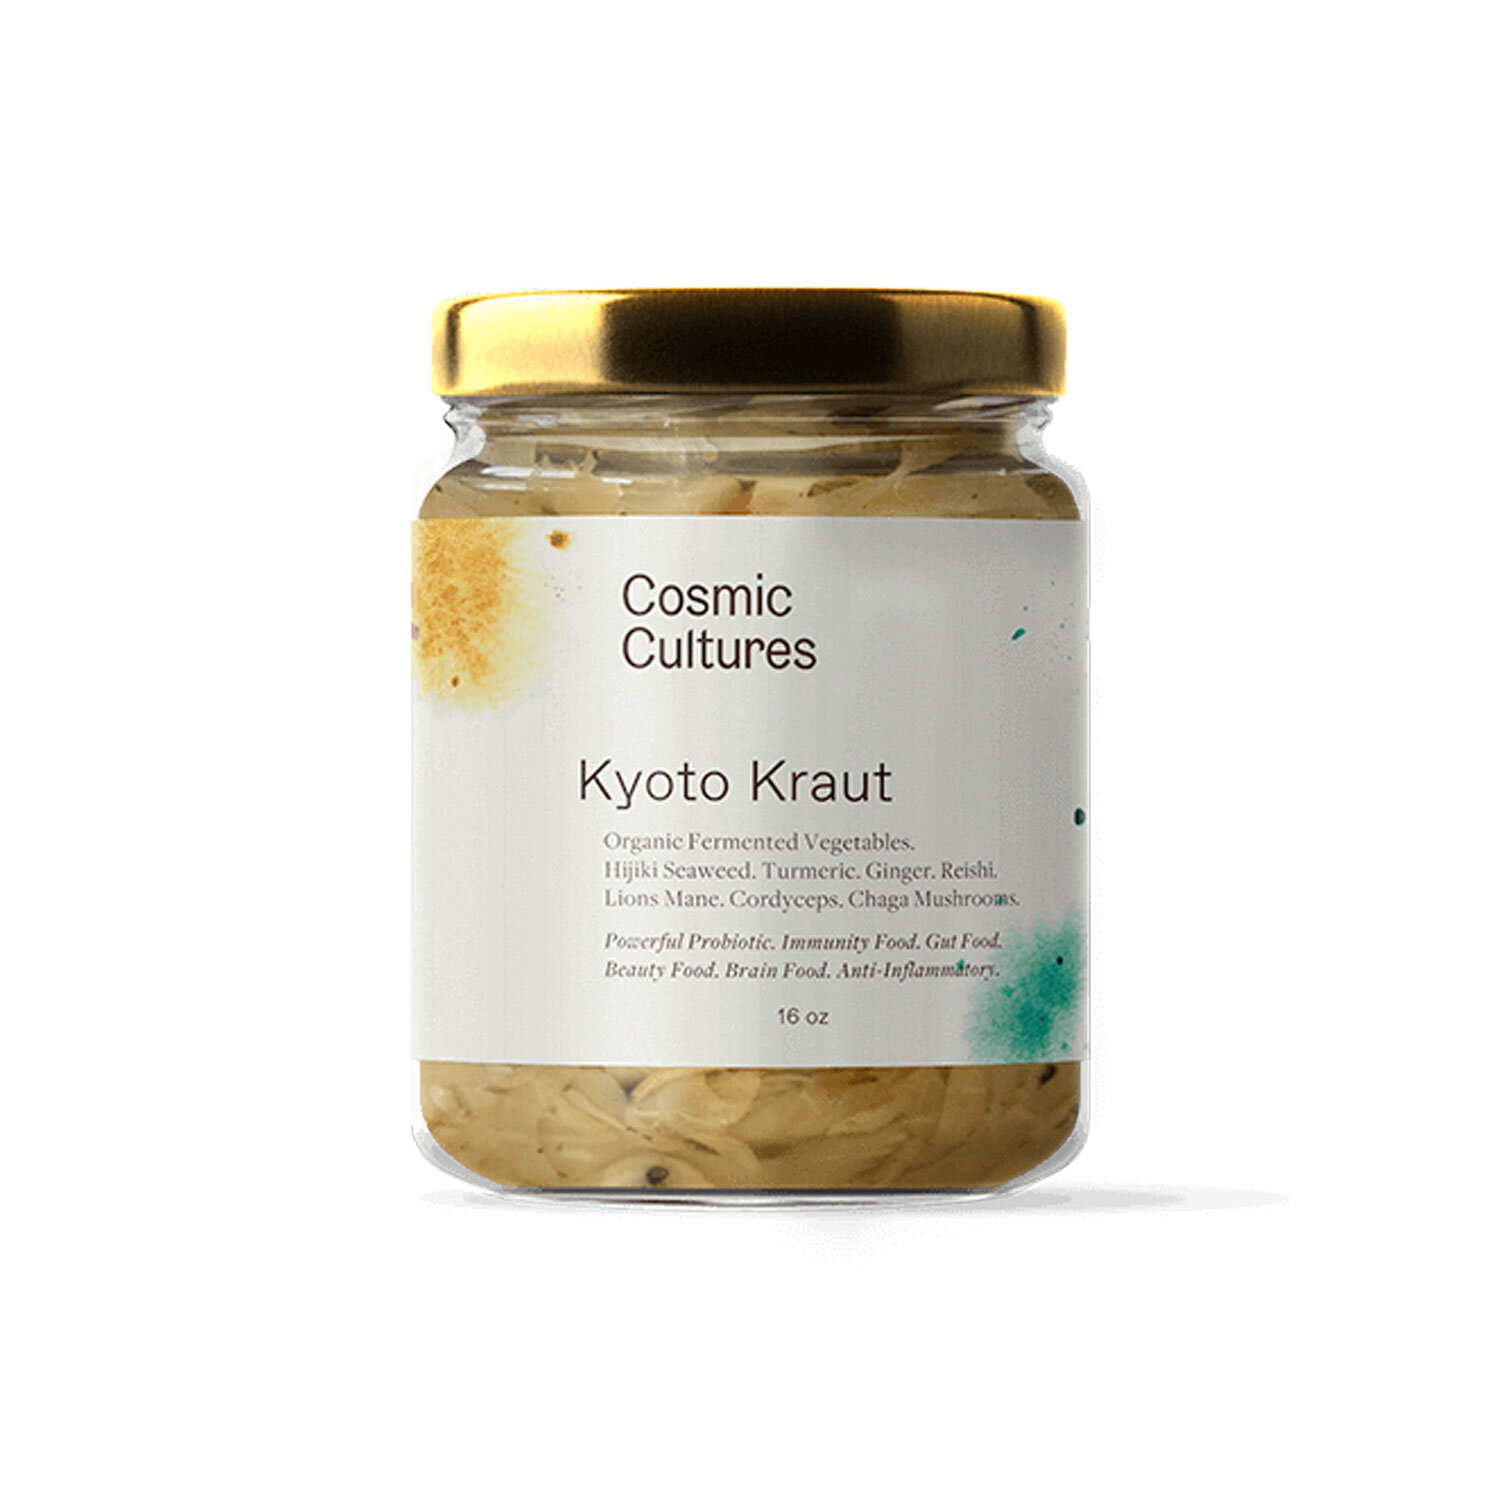 Kyoto Kraut by Cosmic Cultures